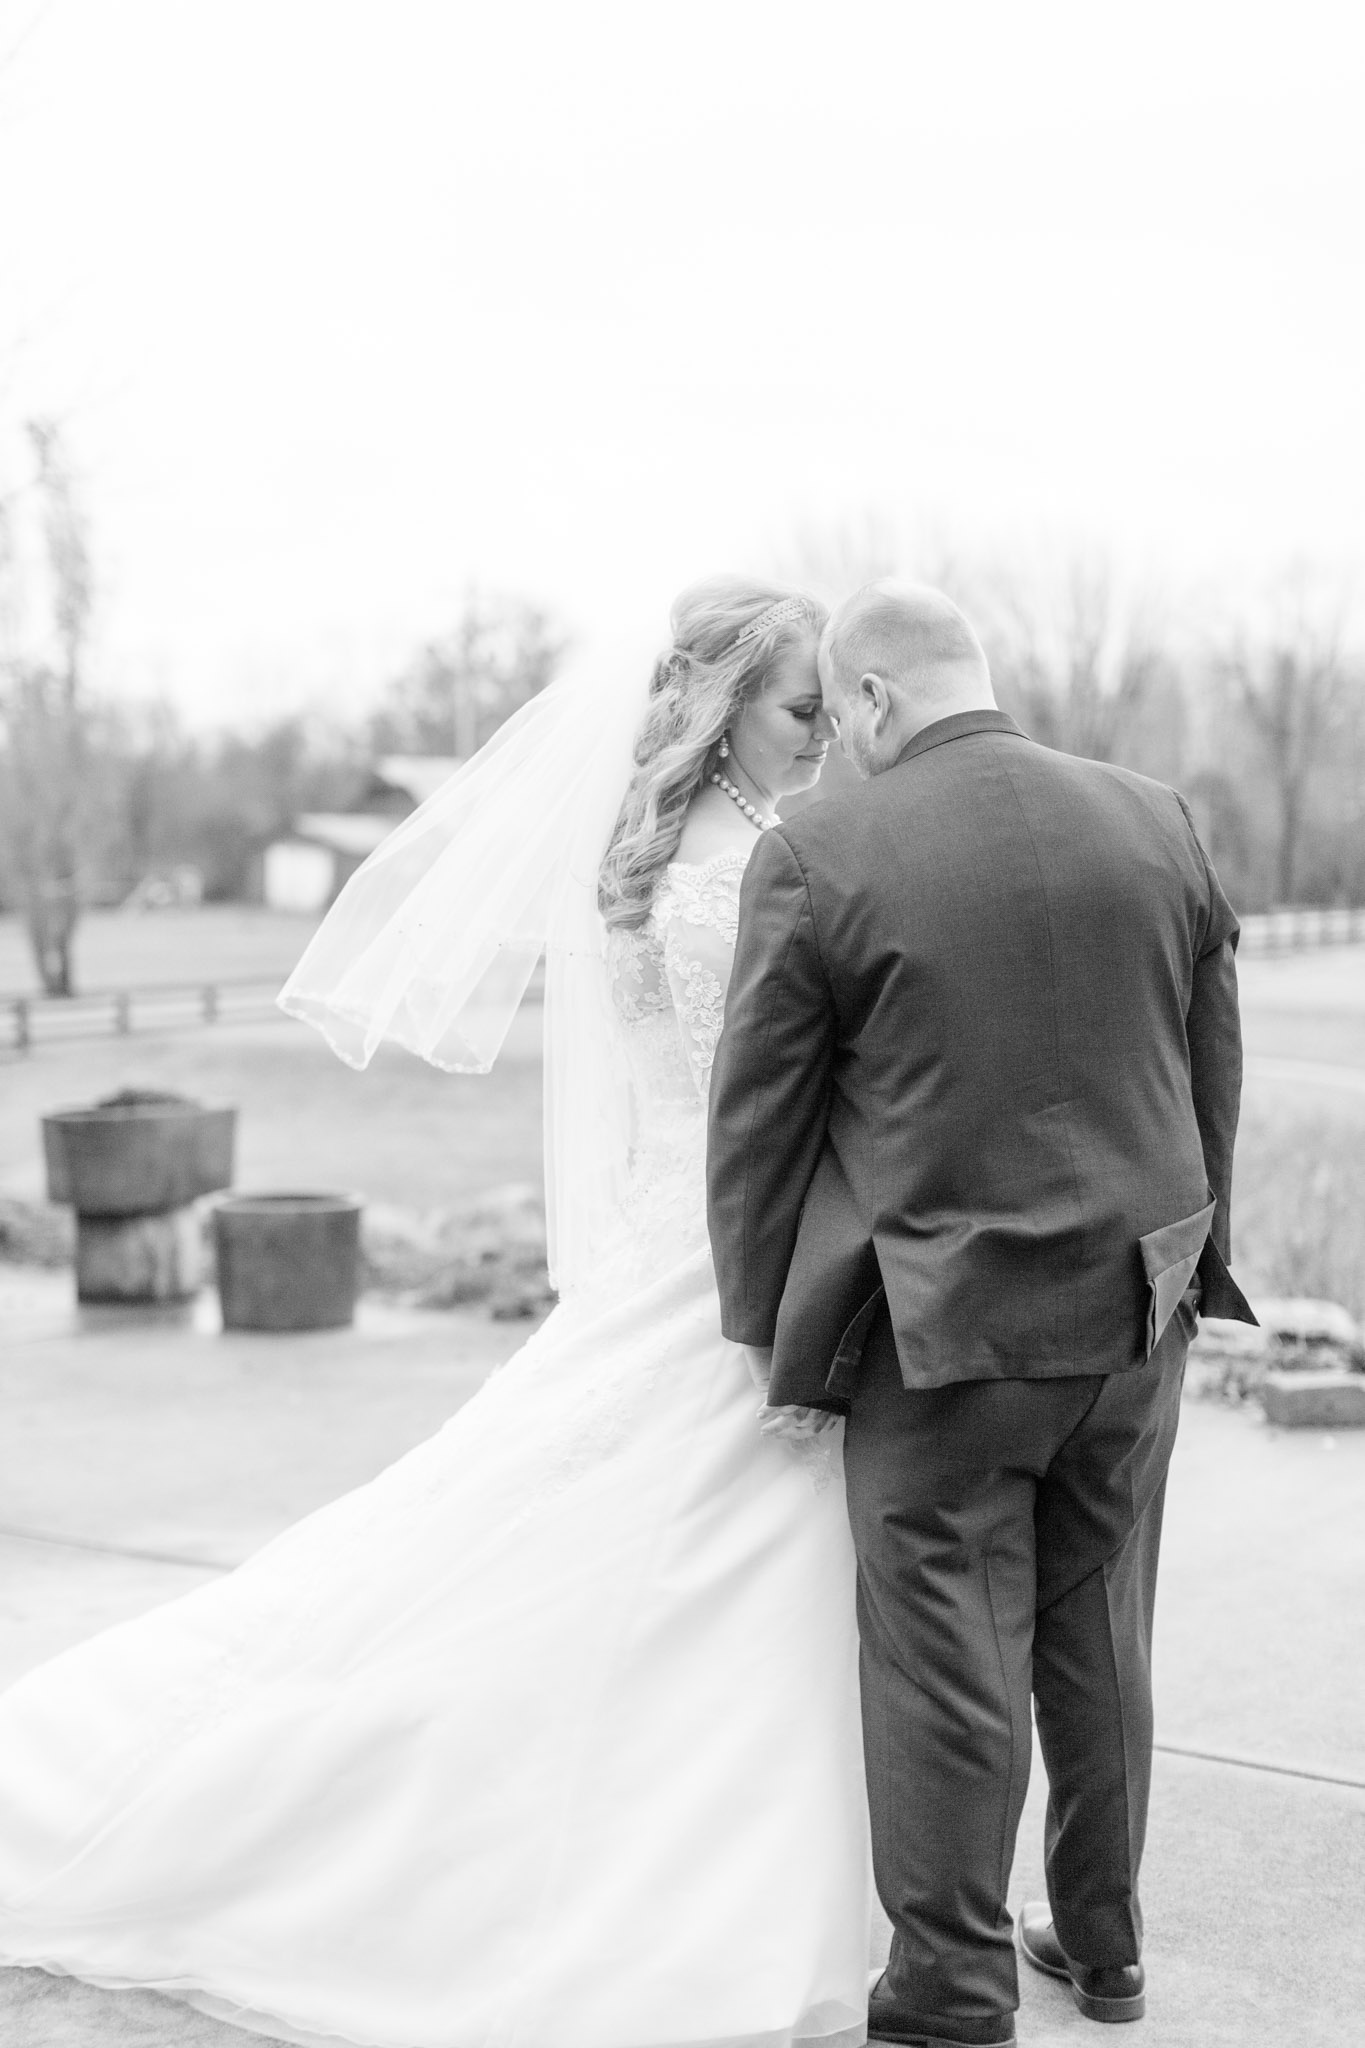 Bride and Groom touch heads together on windy wedding day.